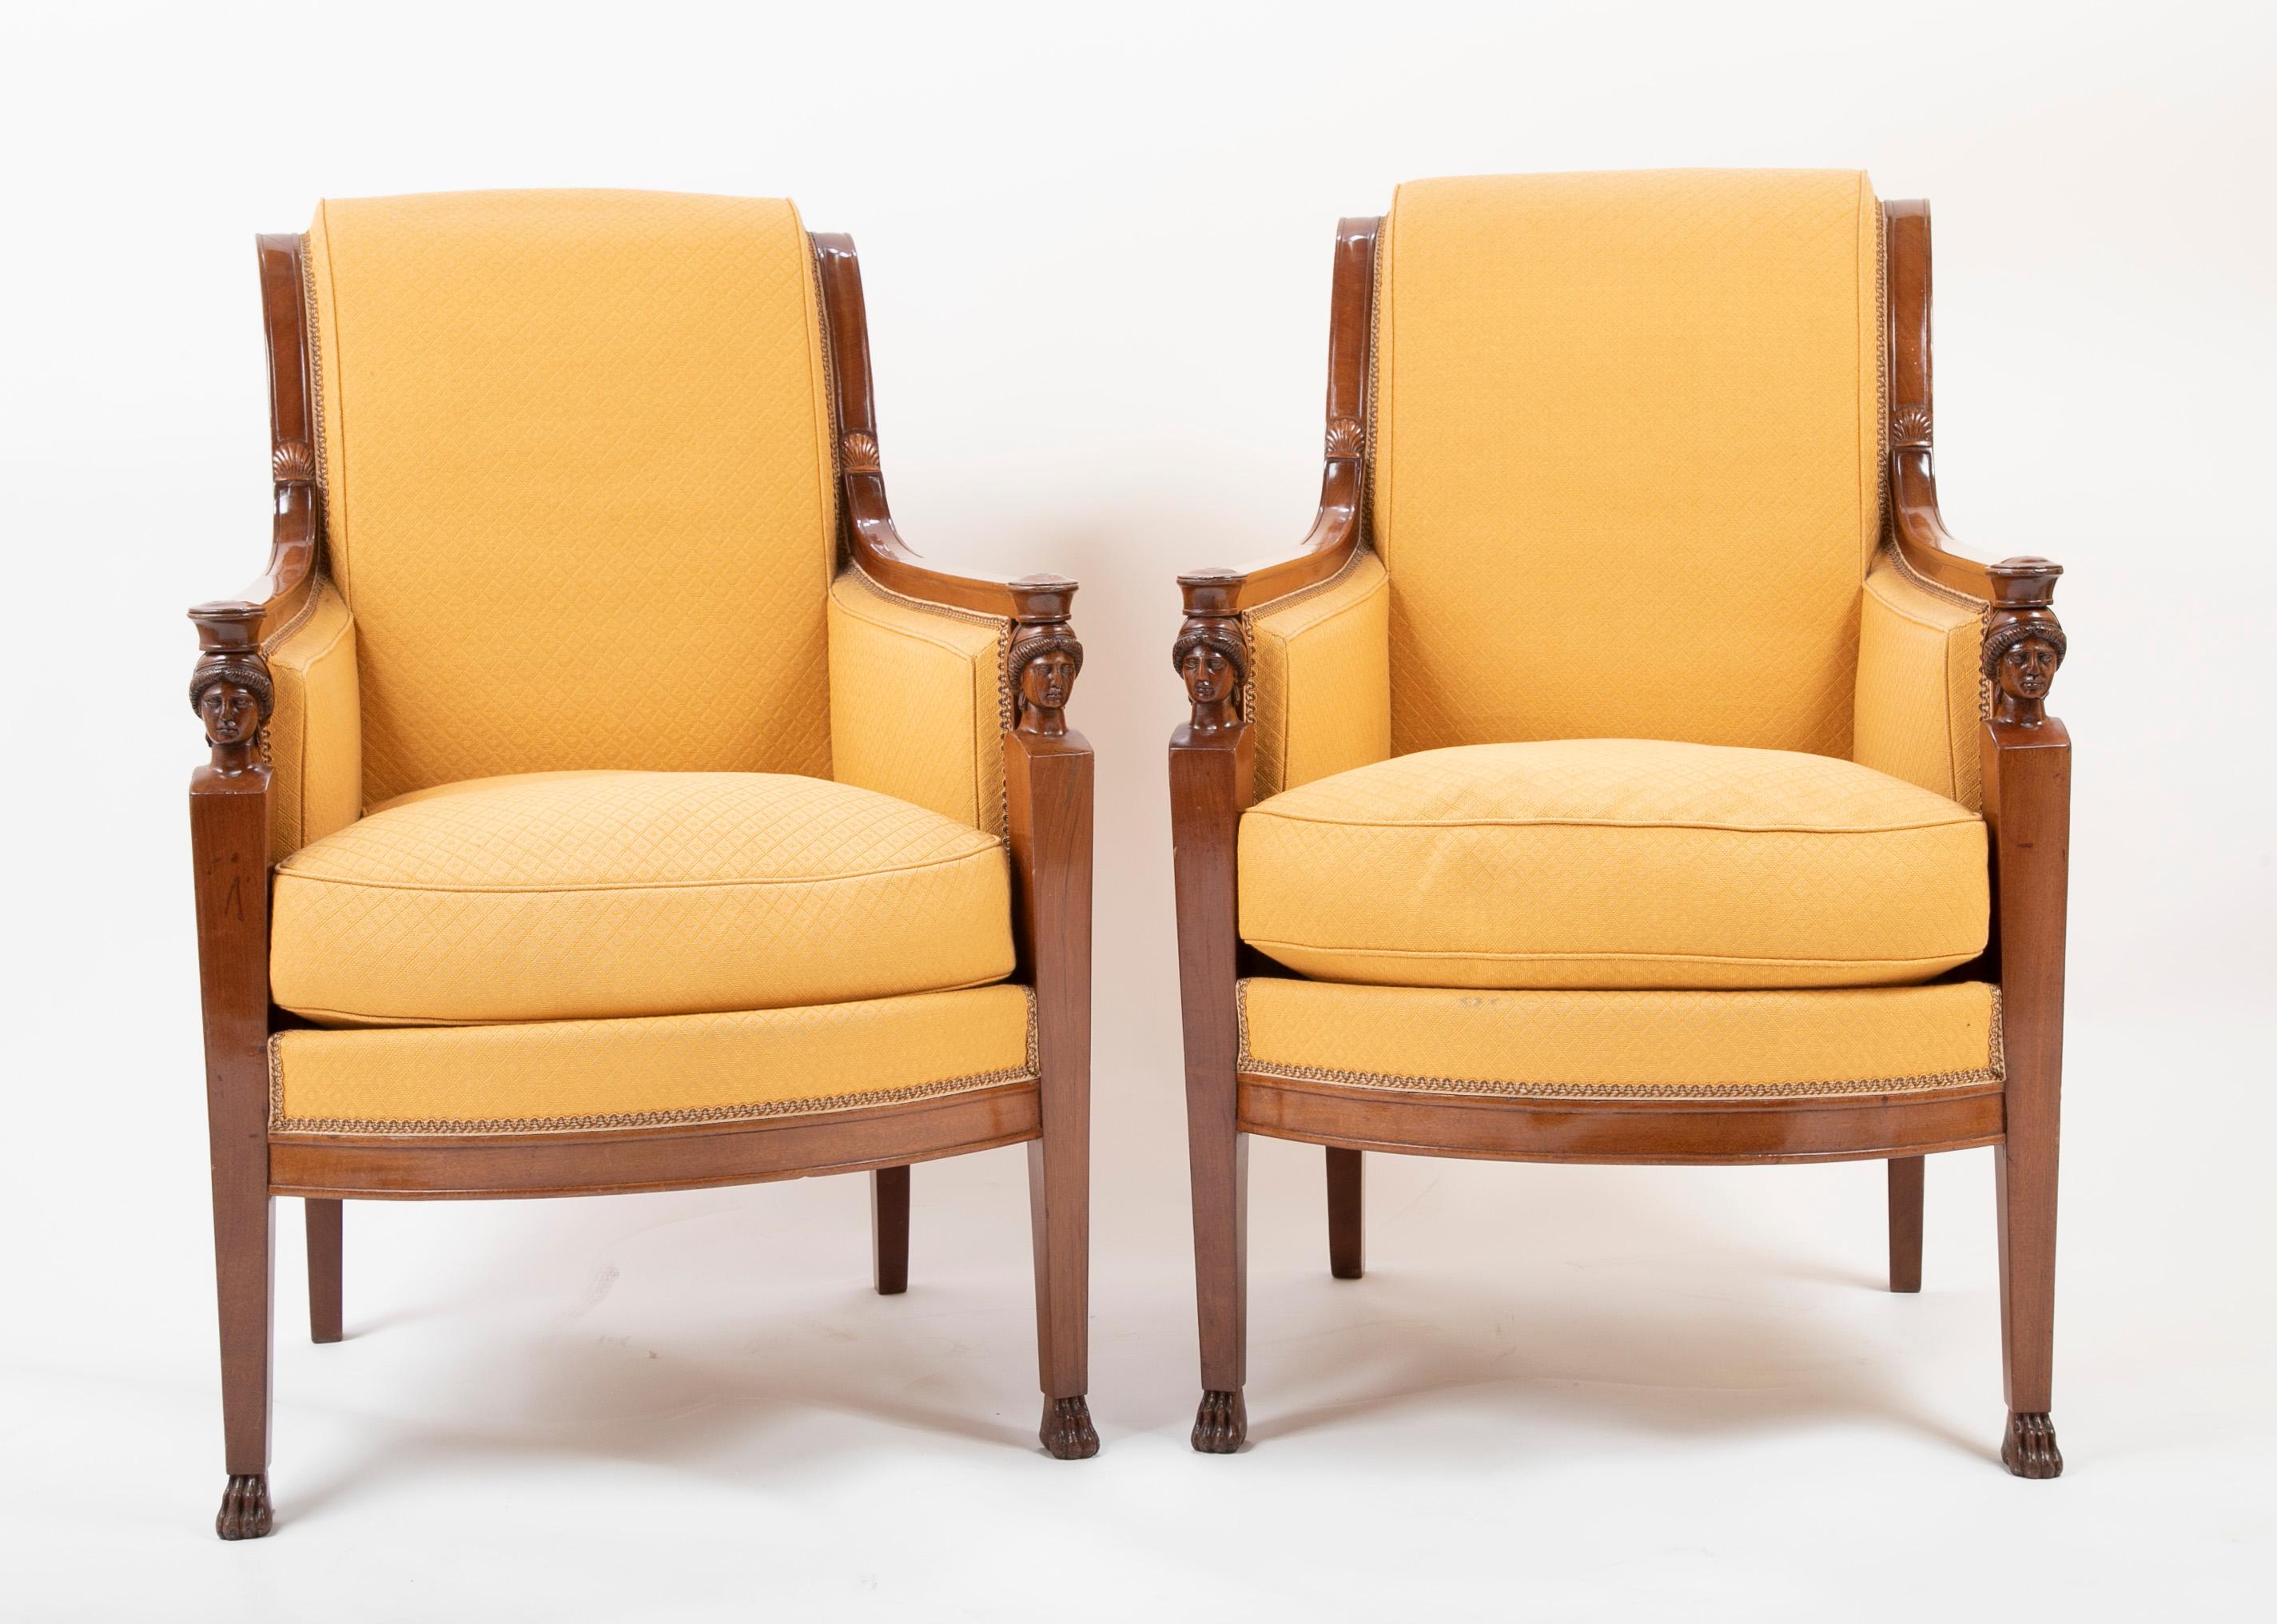 19th Century Pair of French Consulat Armchairs in the Egyptian Revival Taste